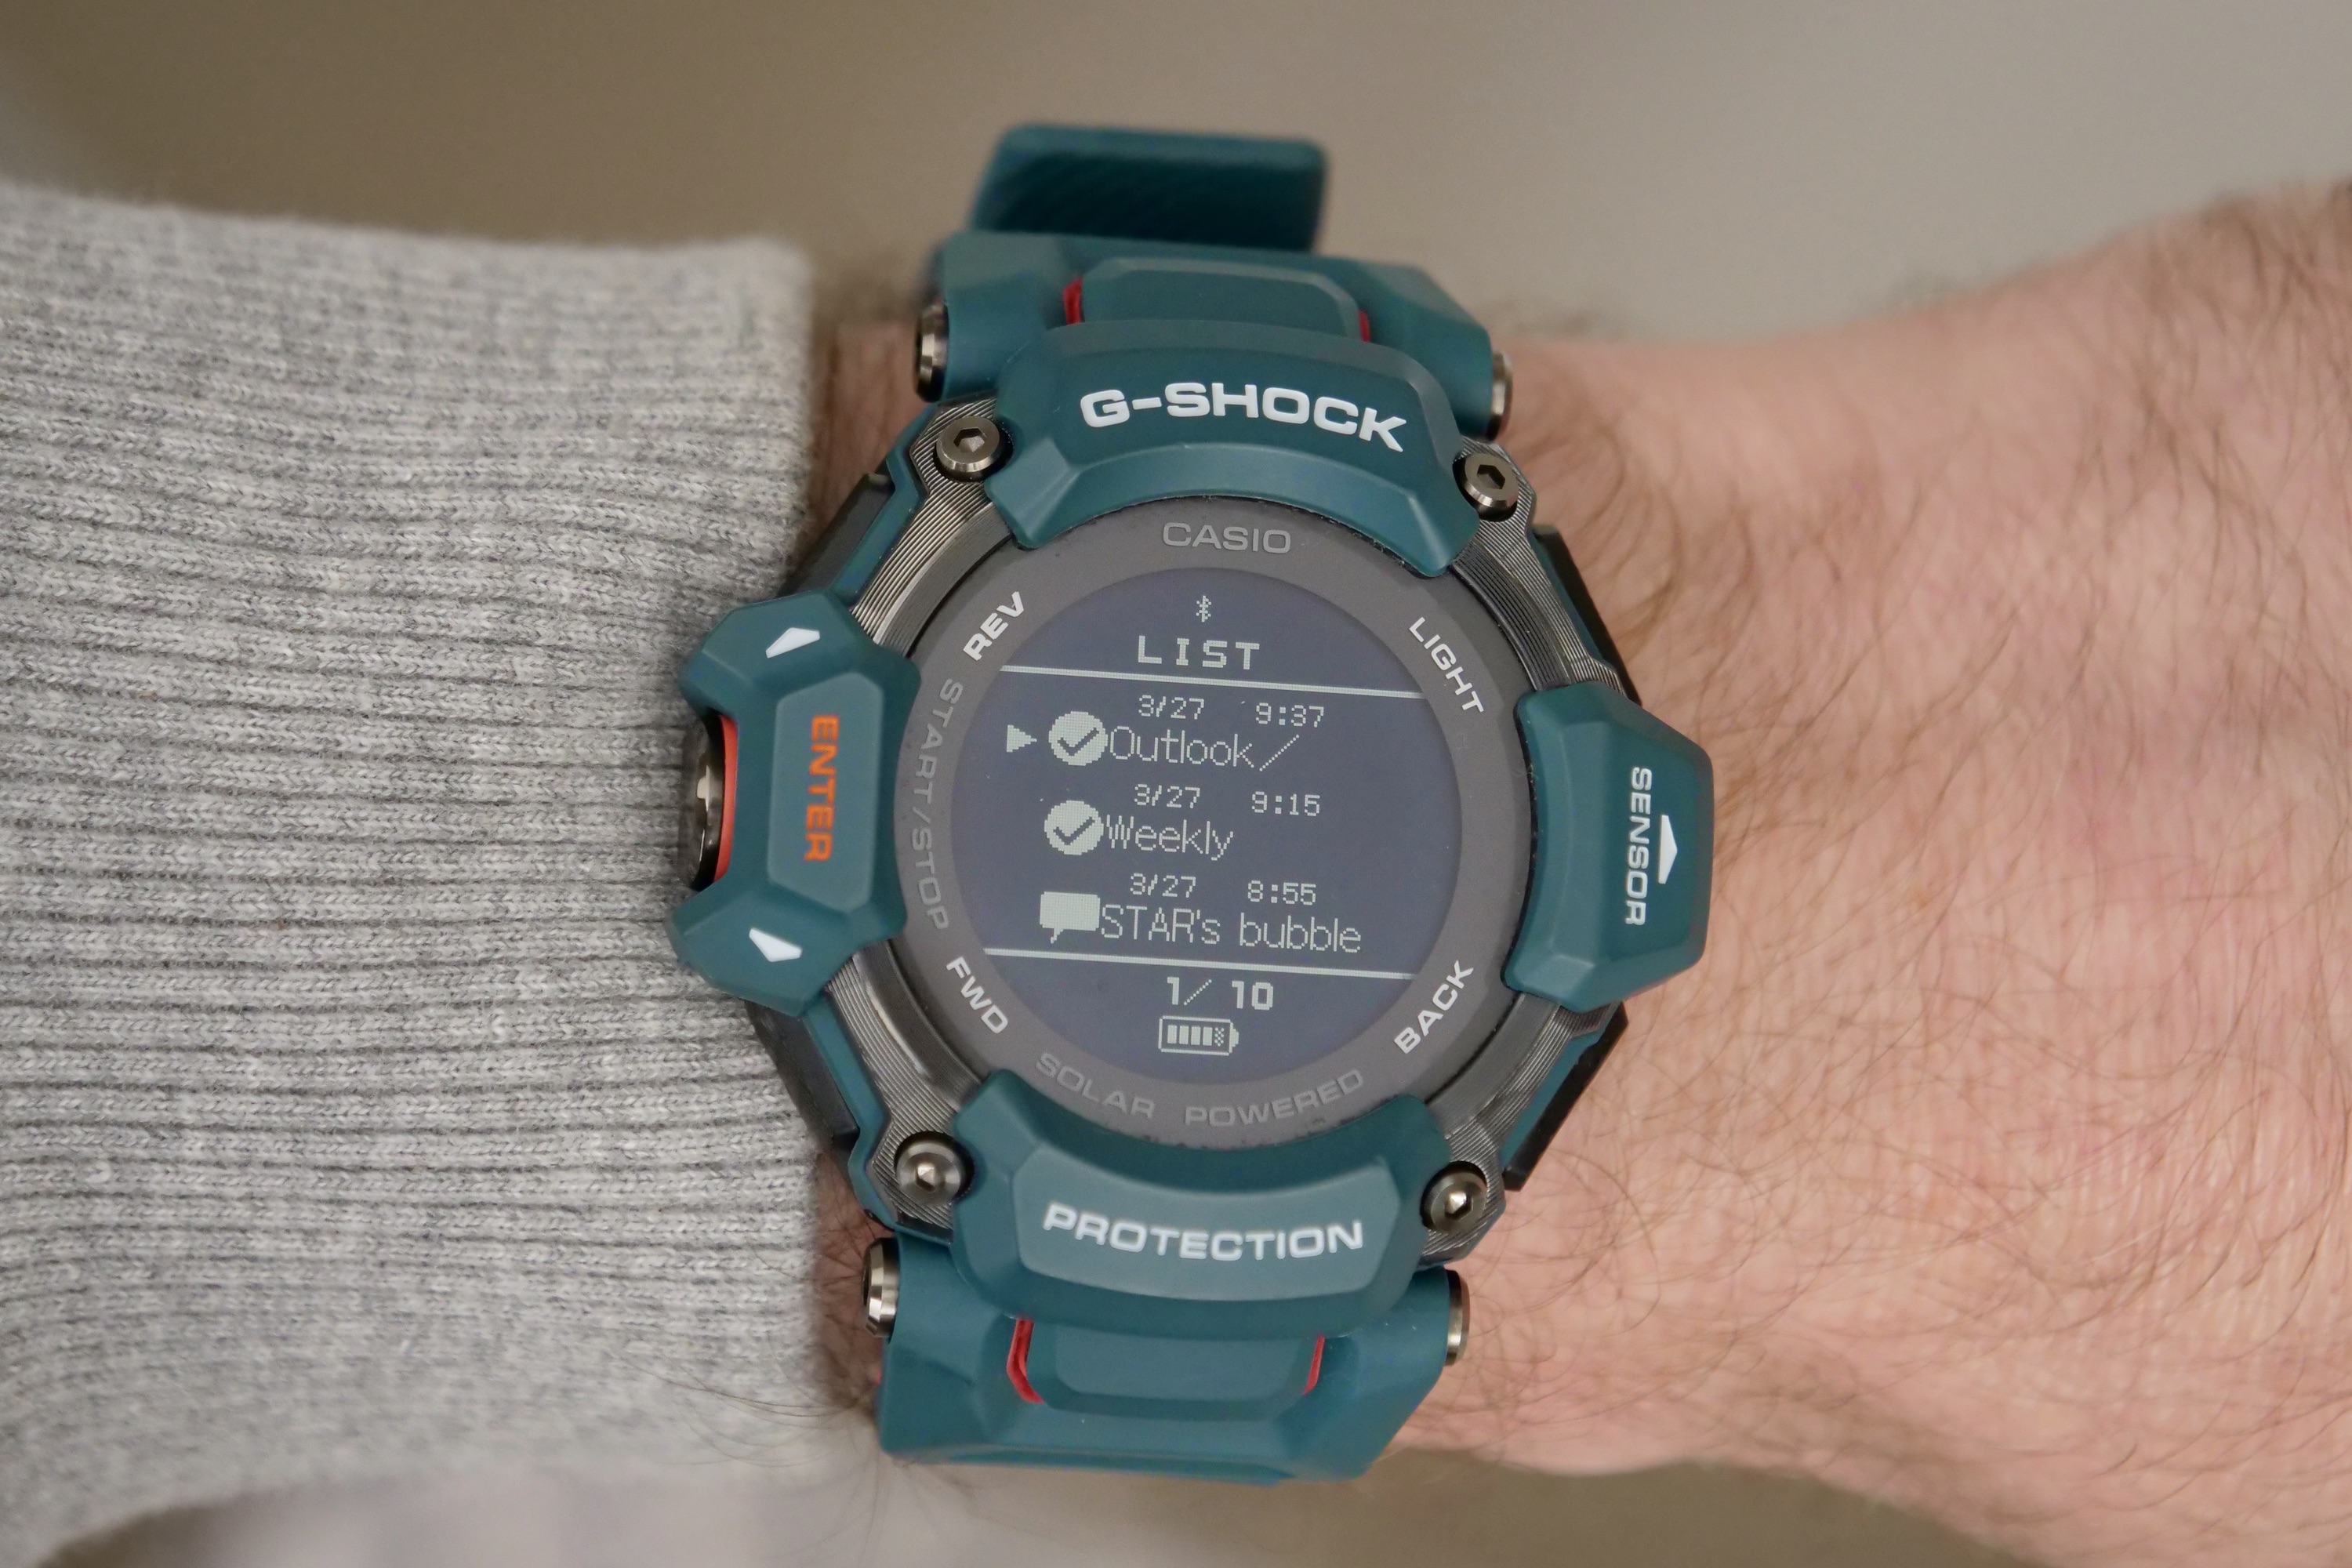 Notifications on the G-Shock GBD-H2000.